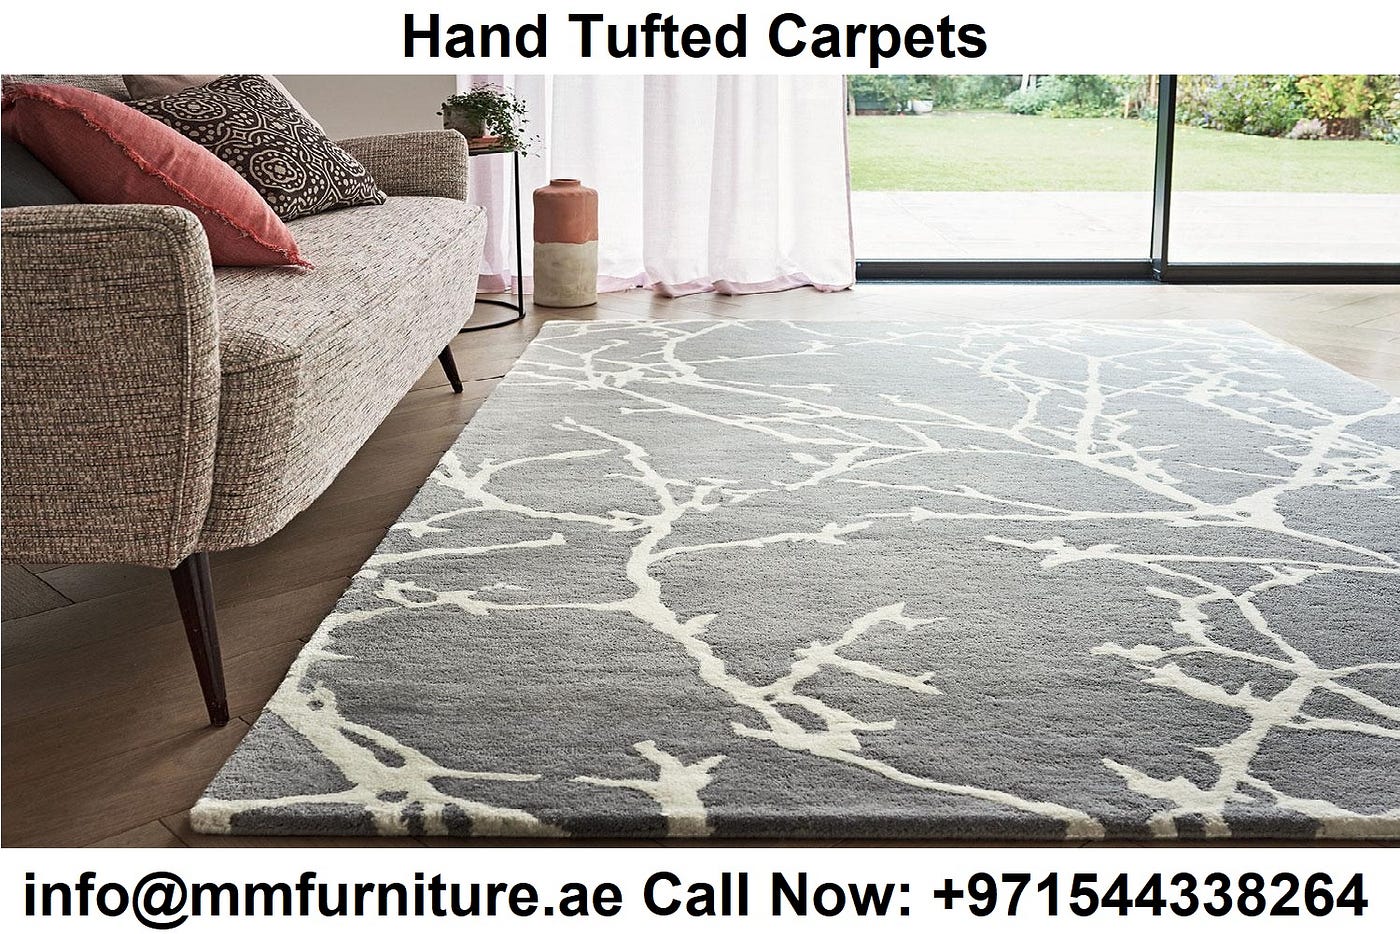 Hand Tufted Carpets | Finishing Techniques | by Carpets and Curtains |  Medium